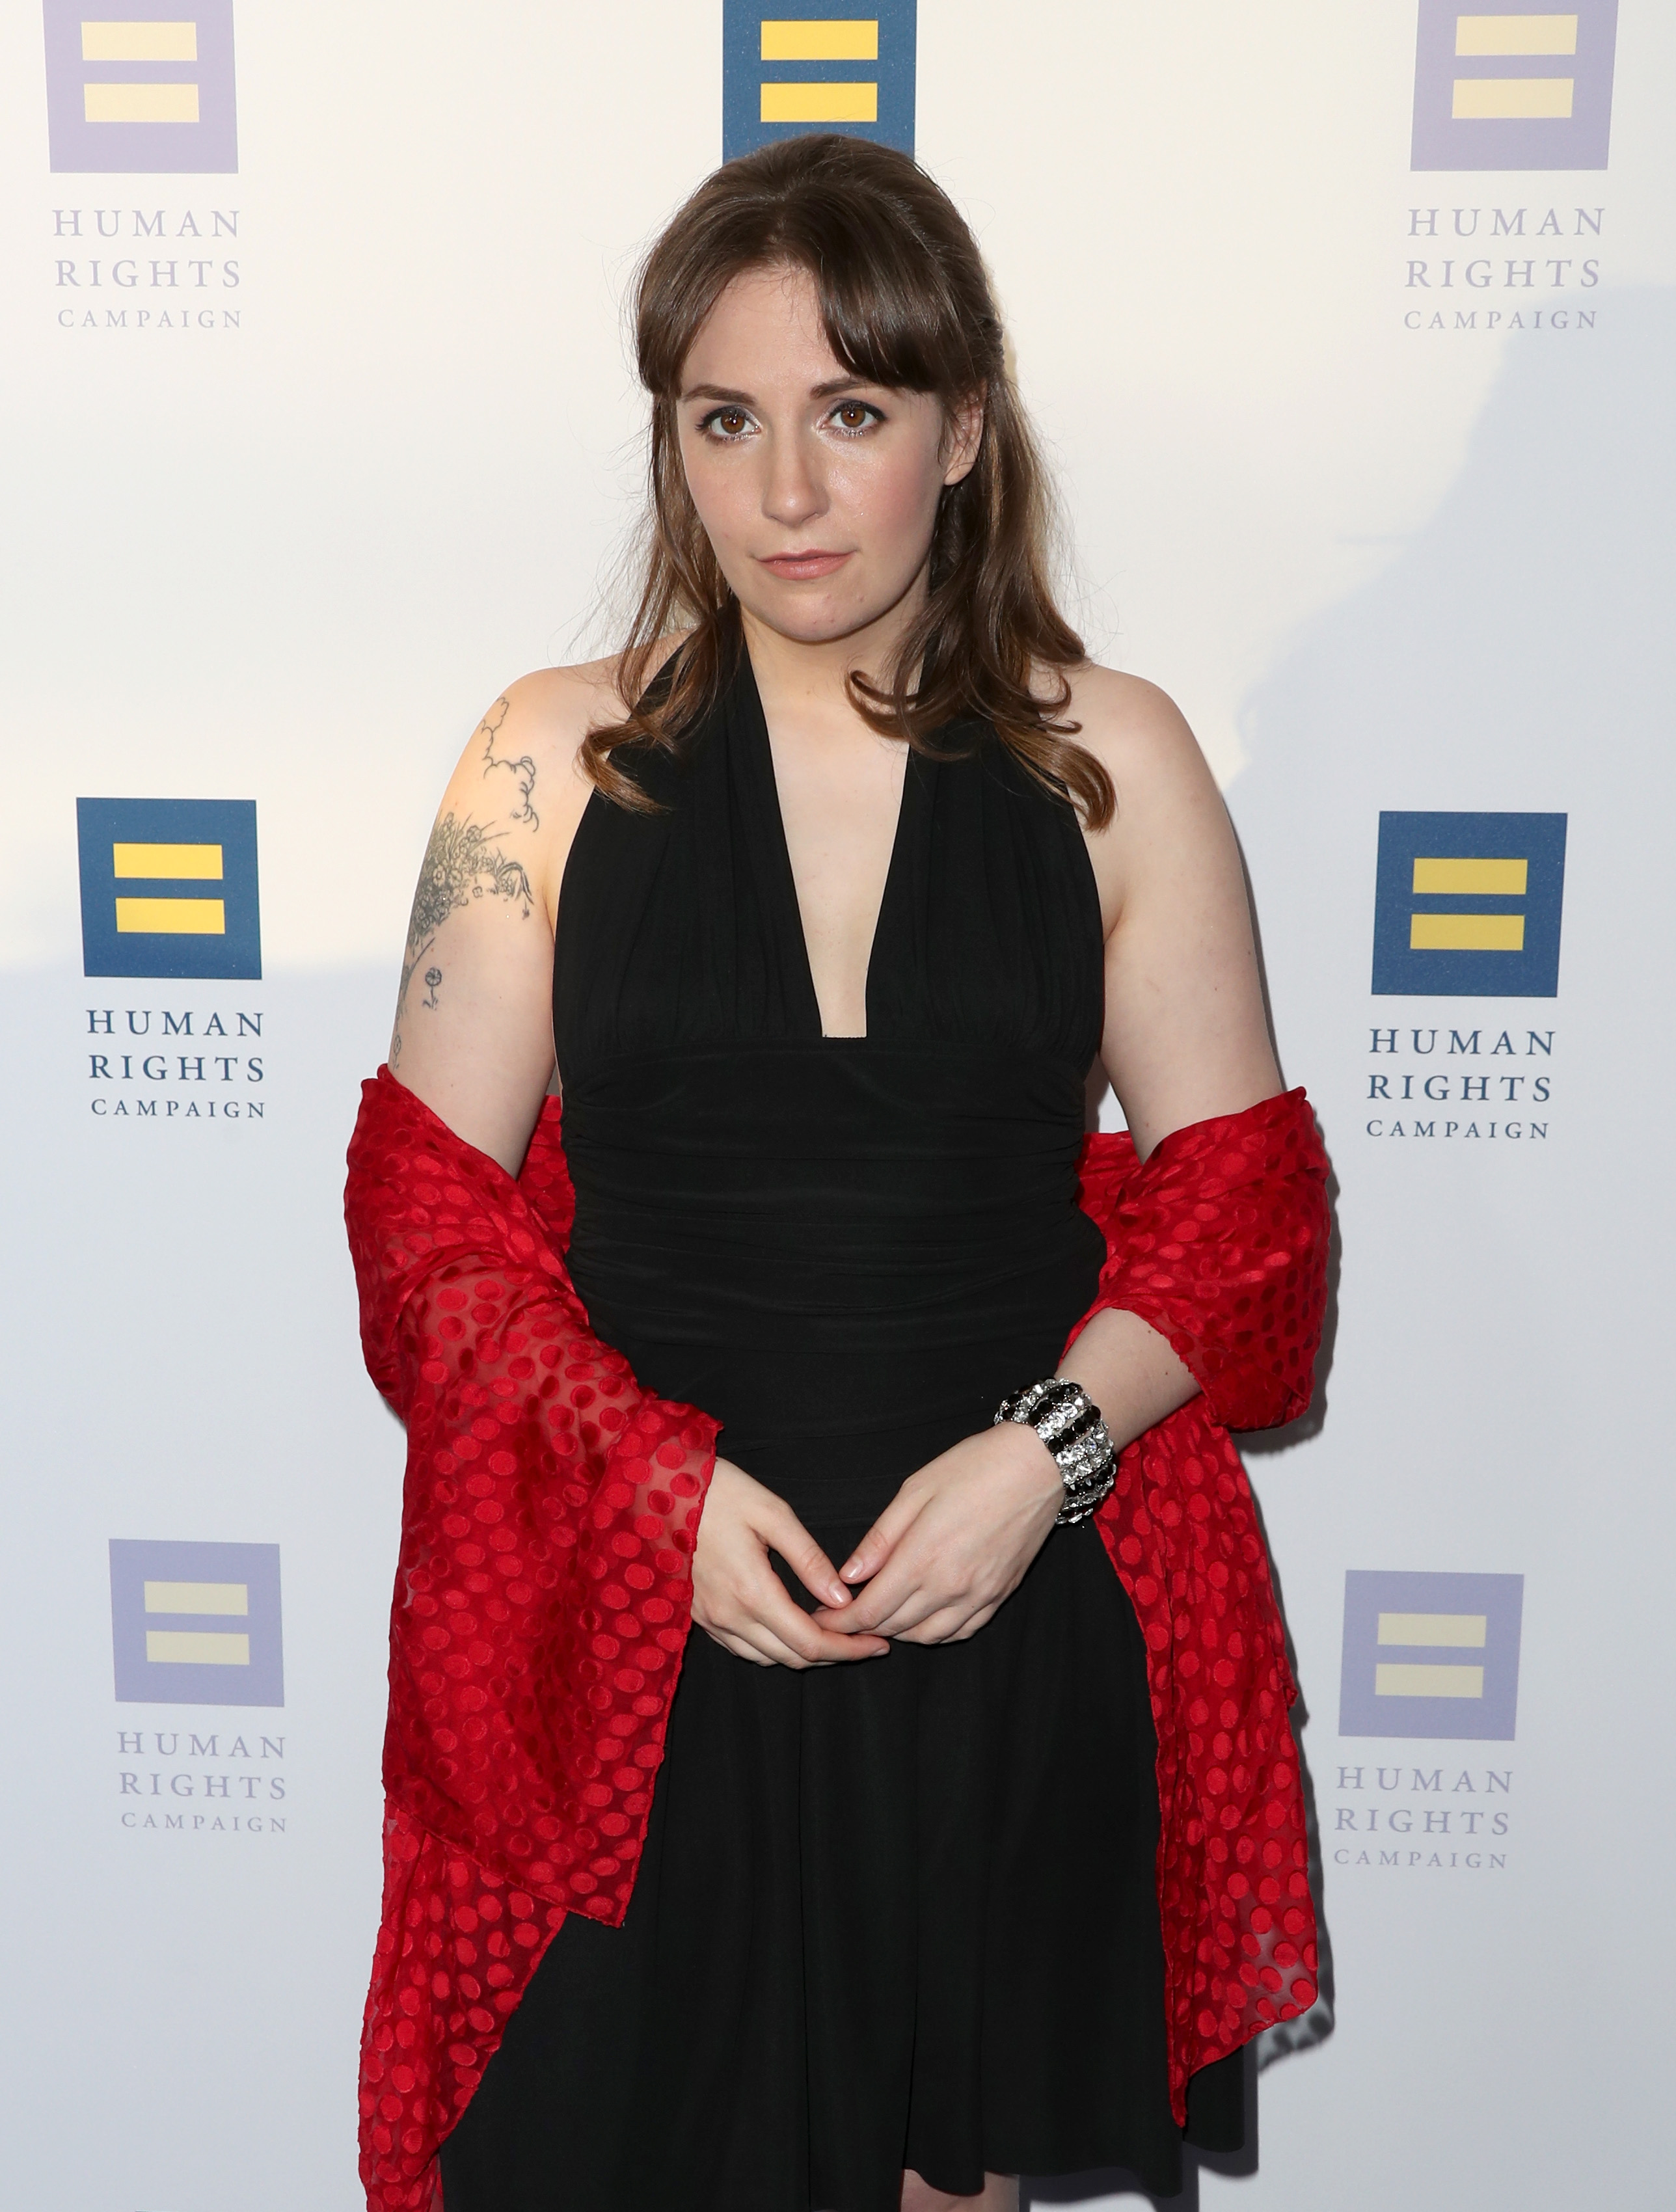 LOS ANGELES, CA - MARCH 18:  Actor Lena Dunham at The Human Rights Campaign 2017 Los Angeles Gala Dinner at JW Marriott Los Angeles at L.A. LIVE on March 18, 2017 in Los Angeles, California.  (Photo by Frederick M. Brown/Getty Images) (Frederick M. Brown&mdash;Getty Images)